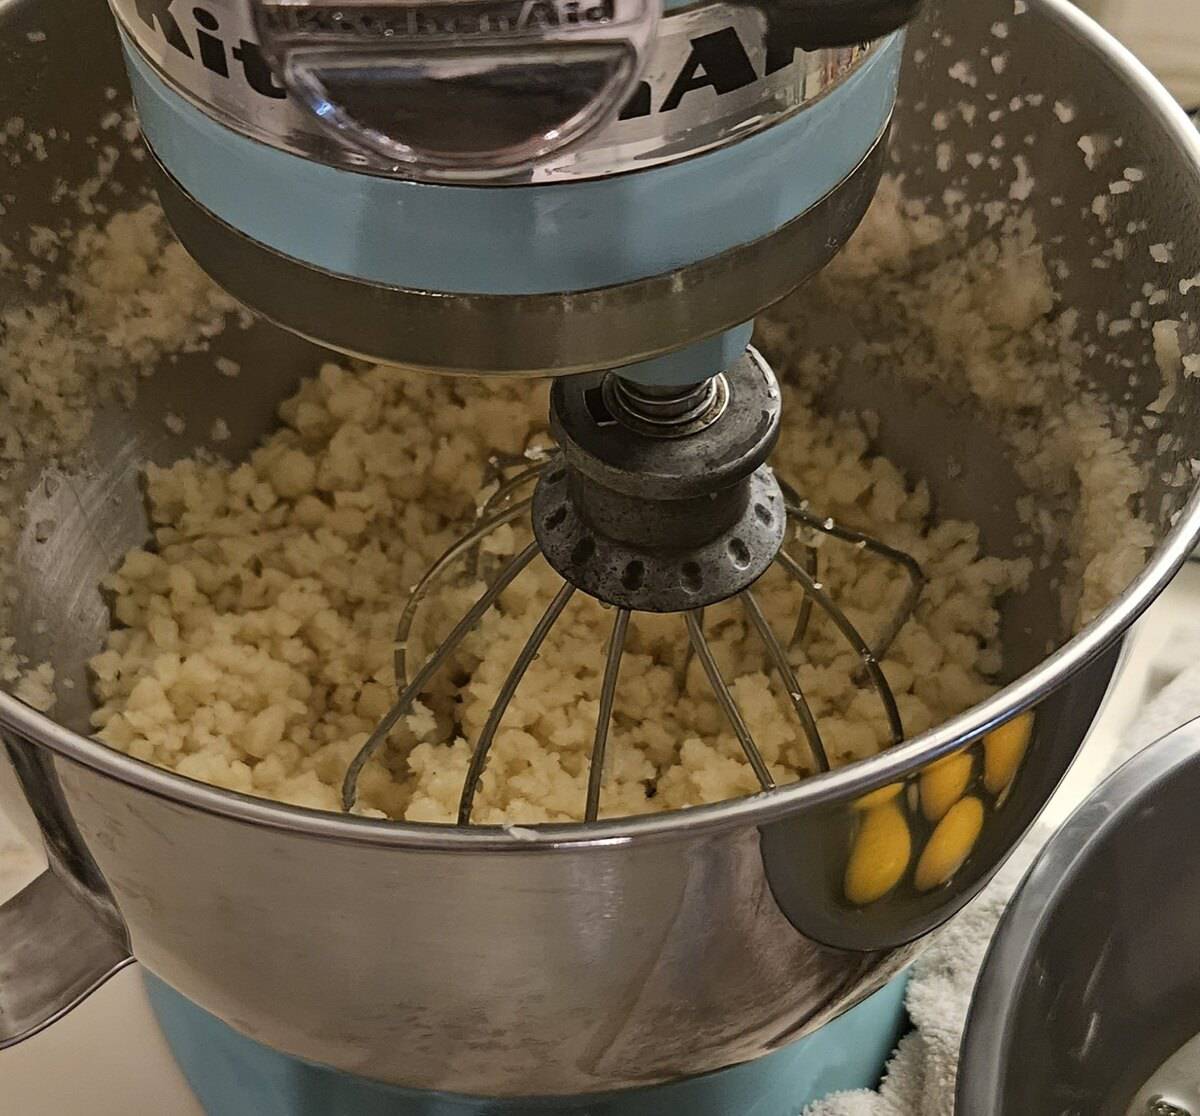 pate choux dough being scattered around the edges of the mixer bowl, cooling